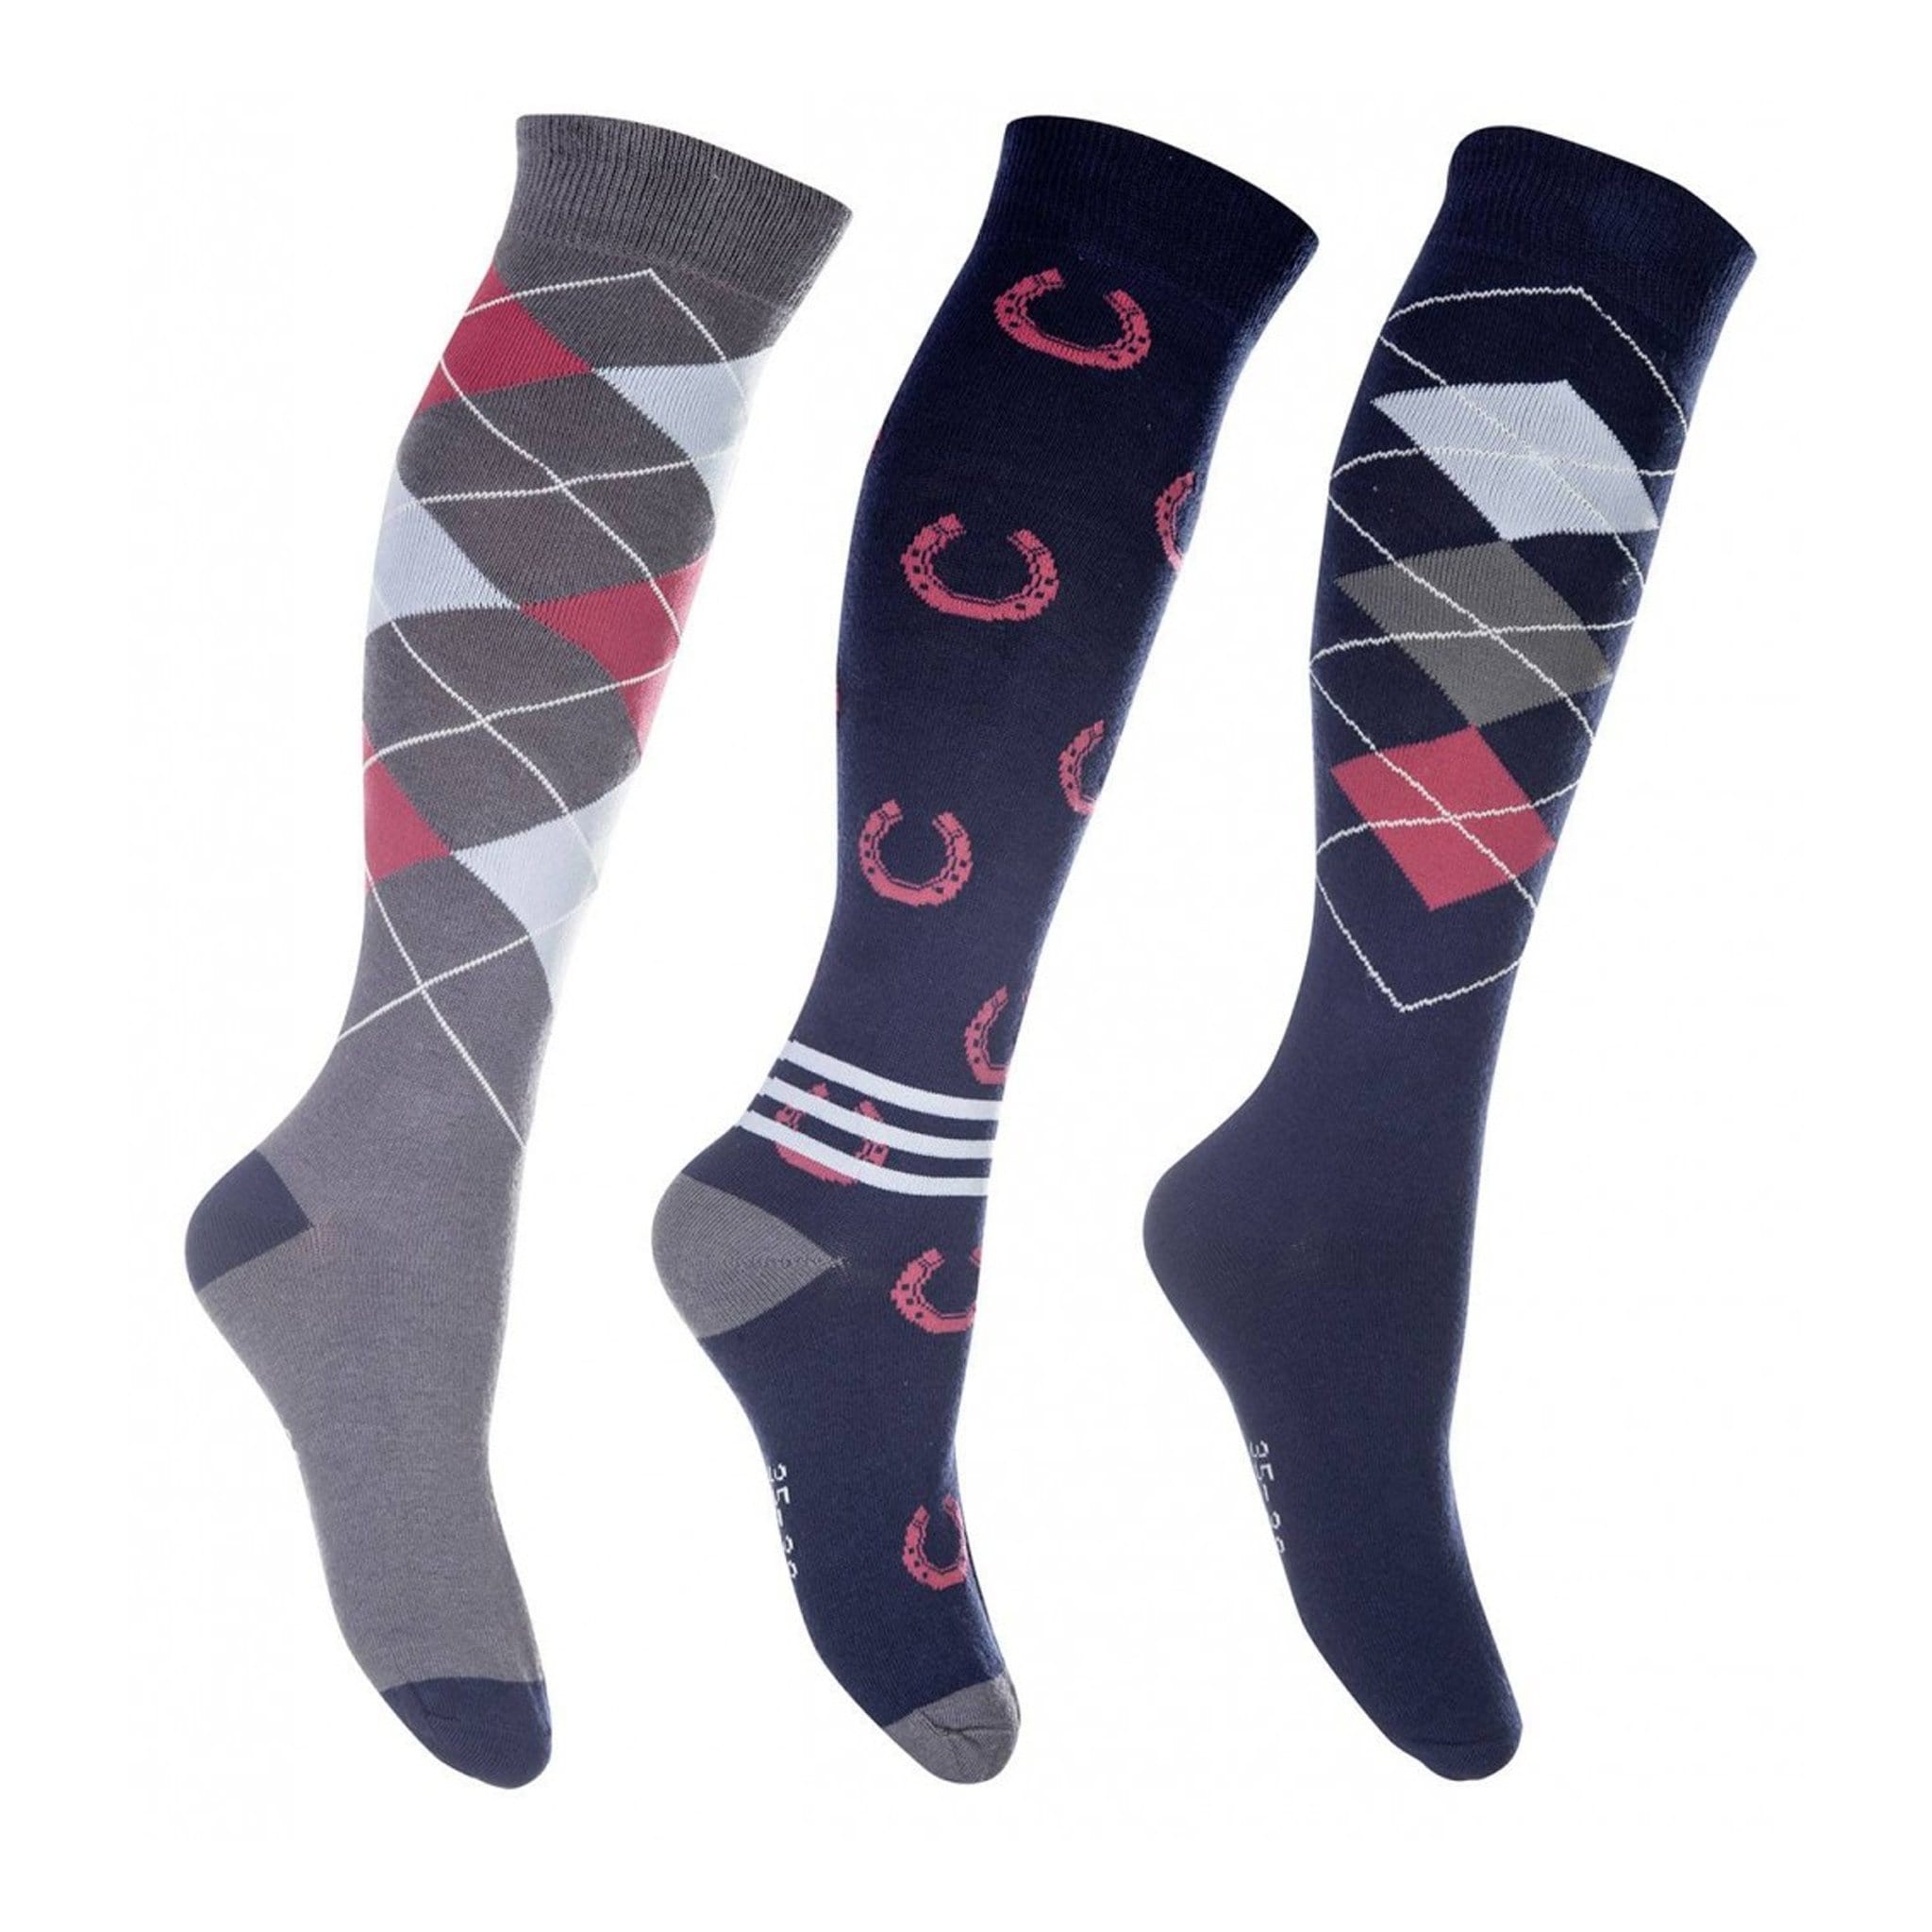 HKM Cardiff Riding Socks 3 Pack Deep Blue And Red 10465